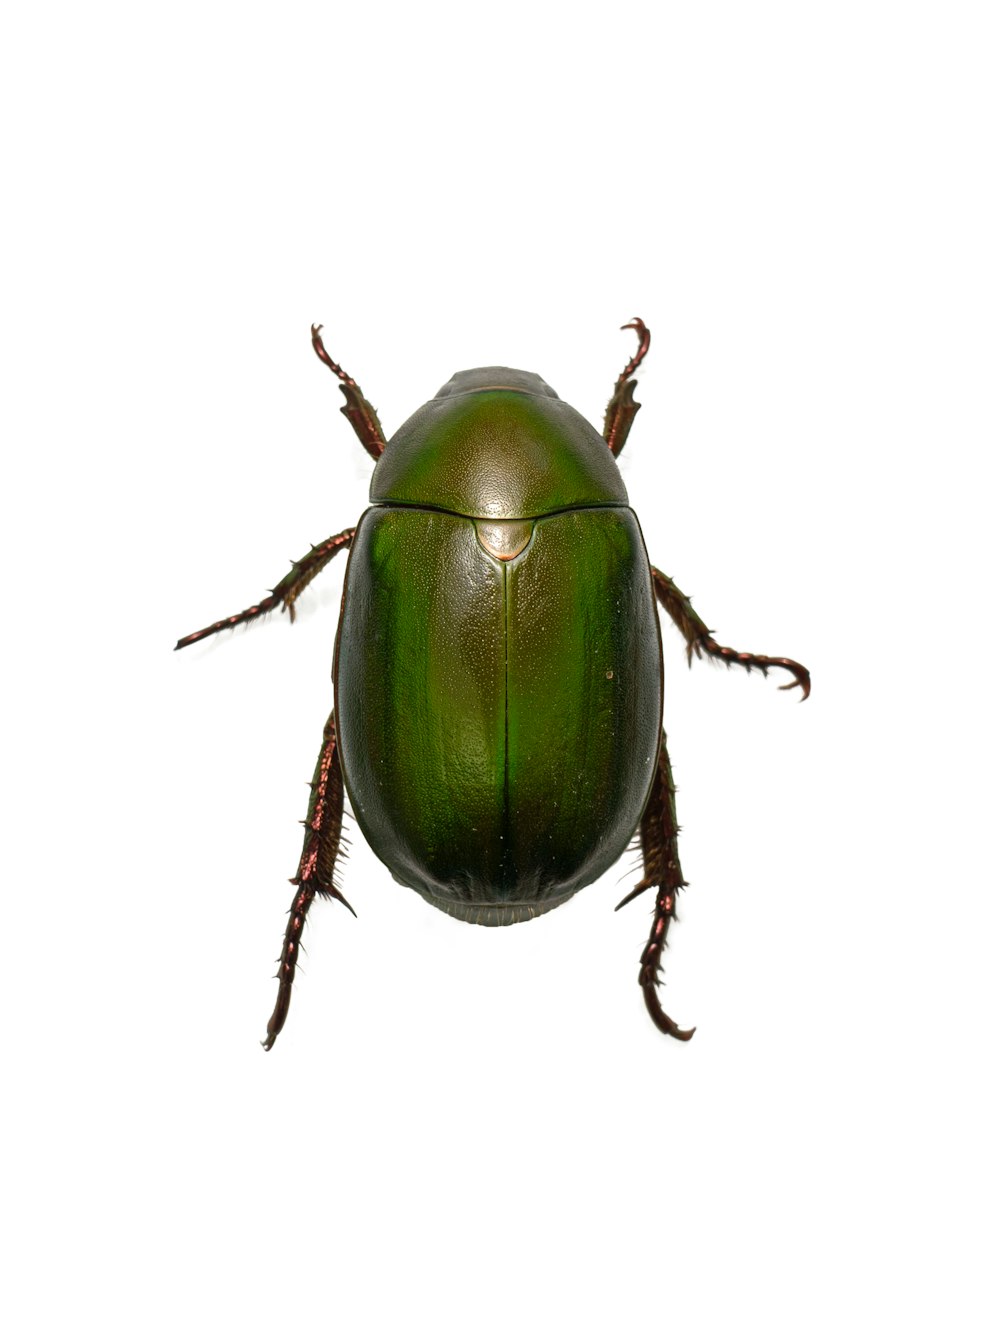 a close up of a green beetle on a white background